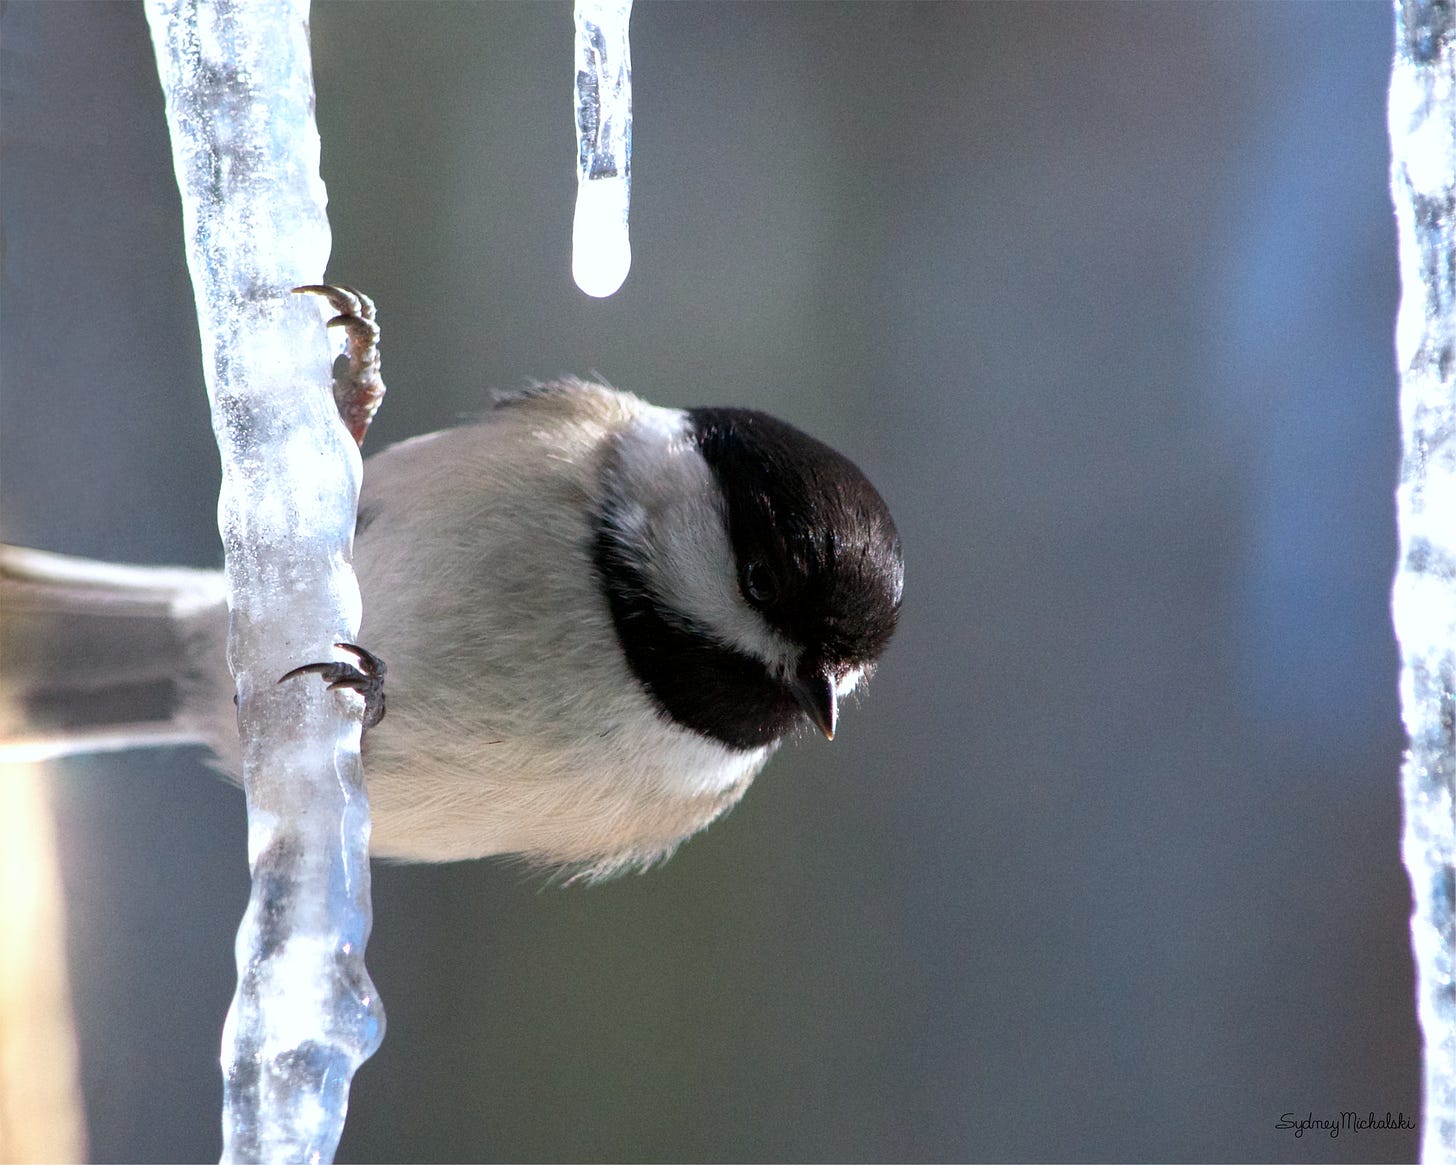 A close-up of a Black-capped Chickadee perching on an icicle.